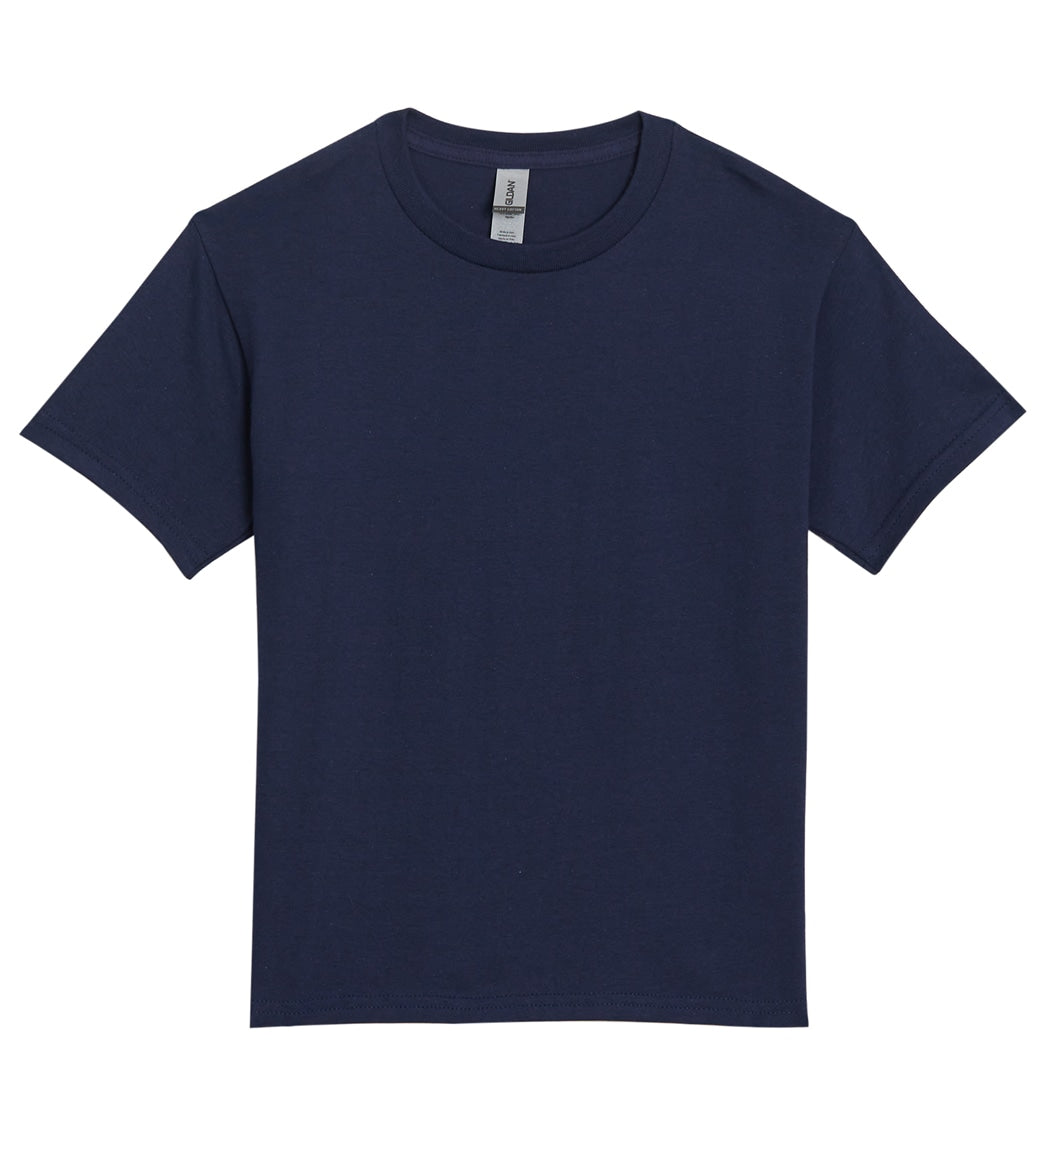 SwimOutlet Youth Cotton Crew Neck T-Shirt